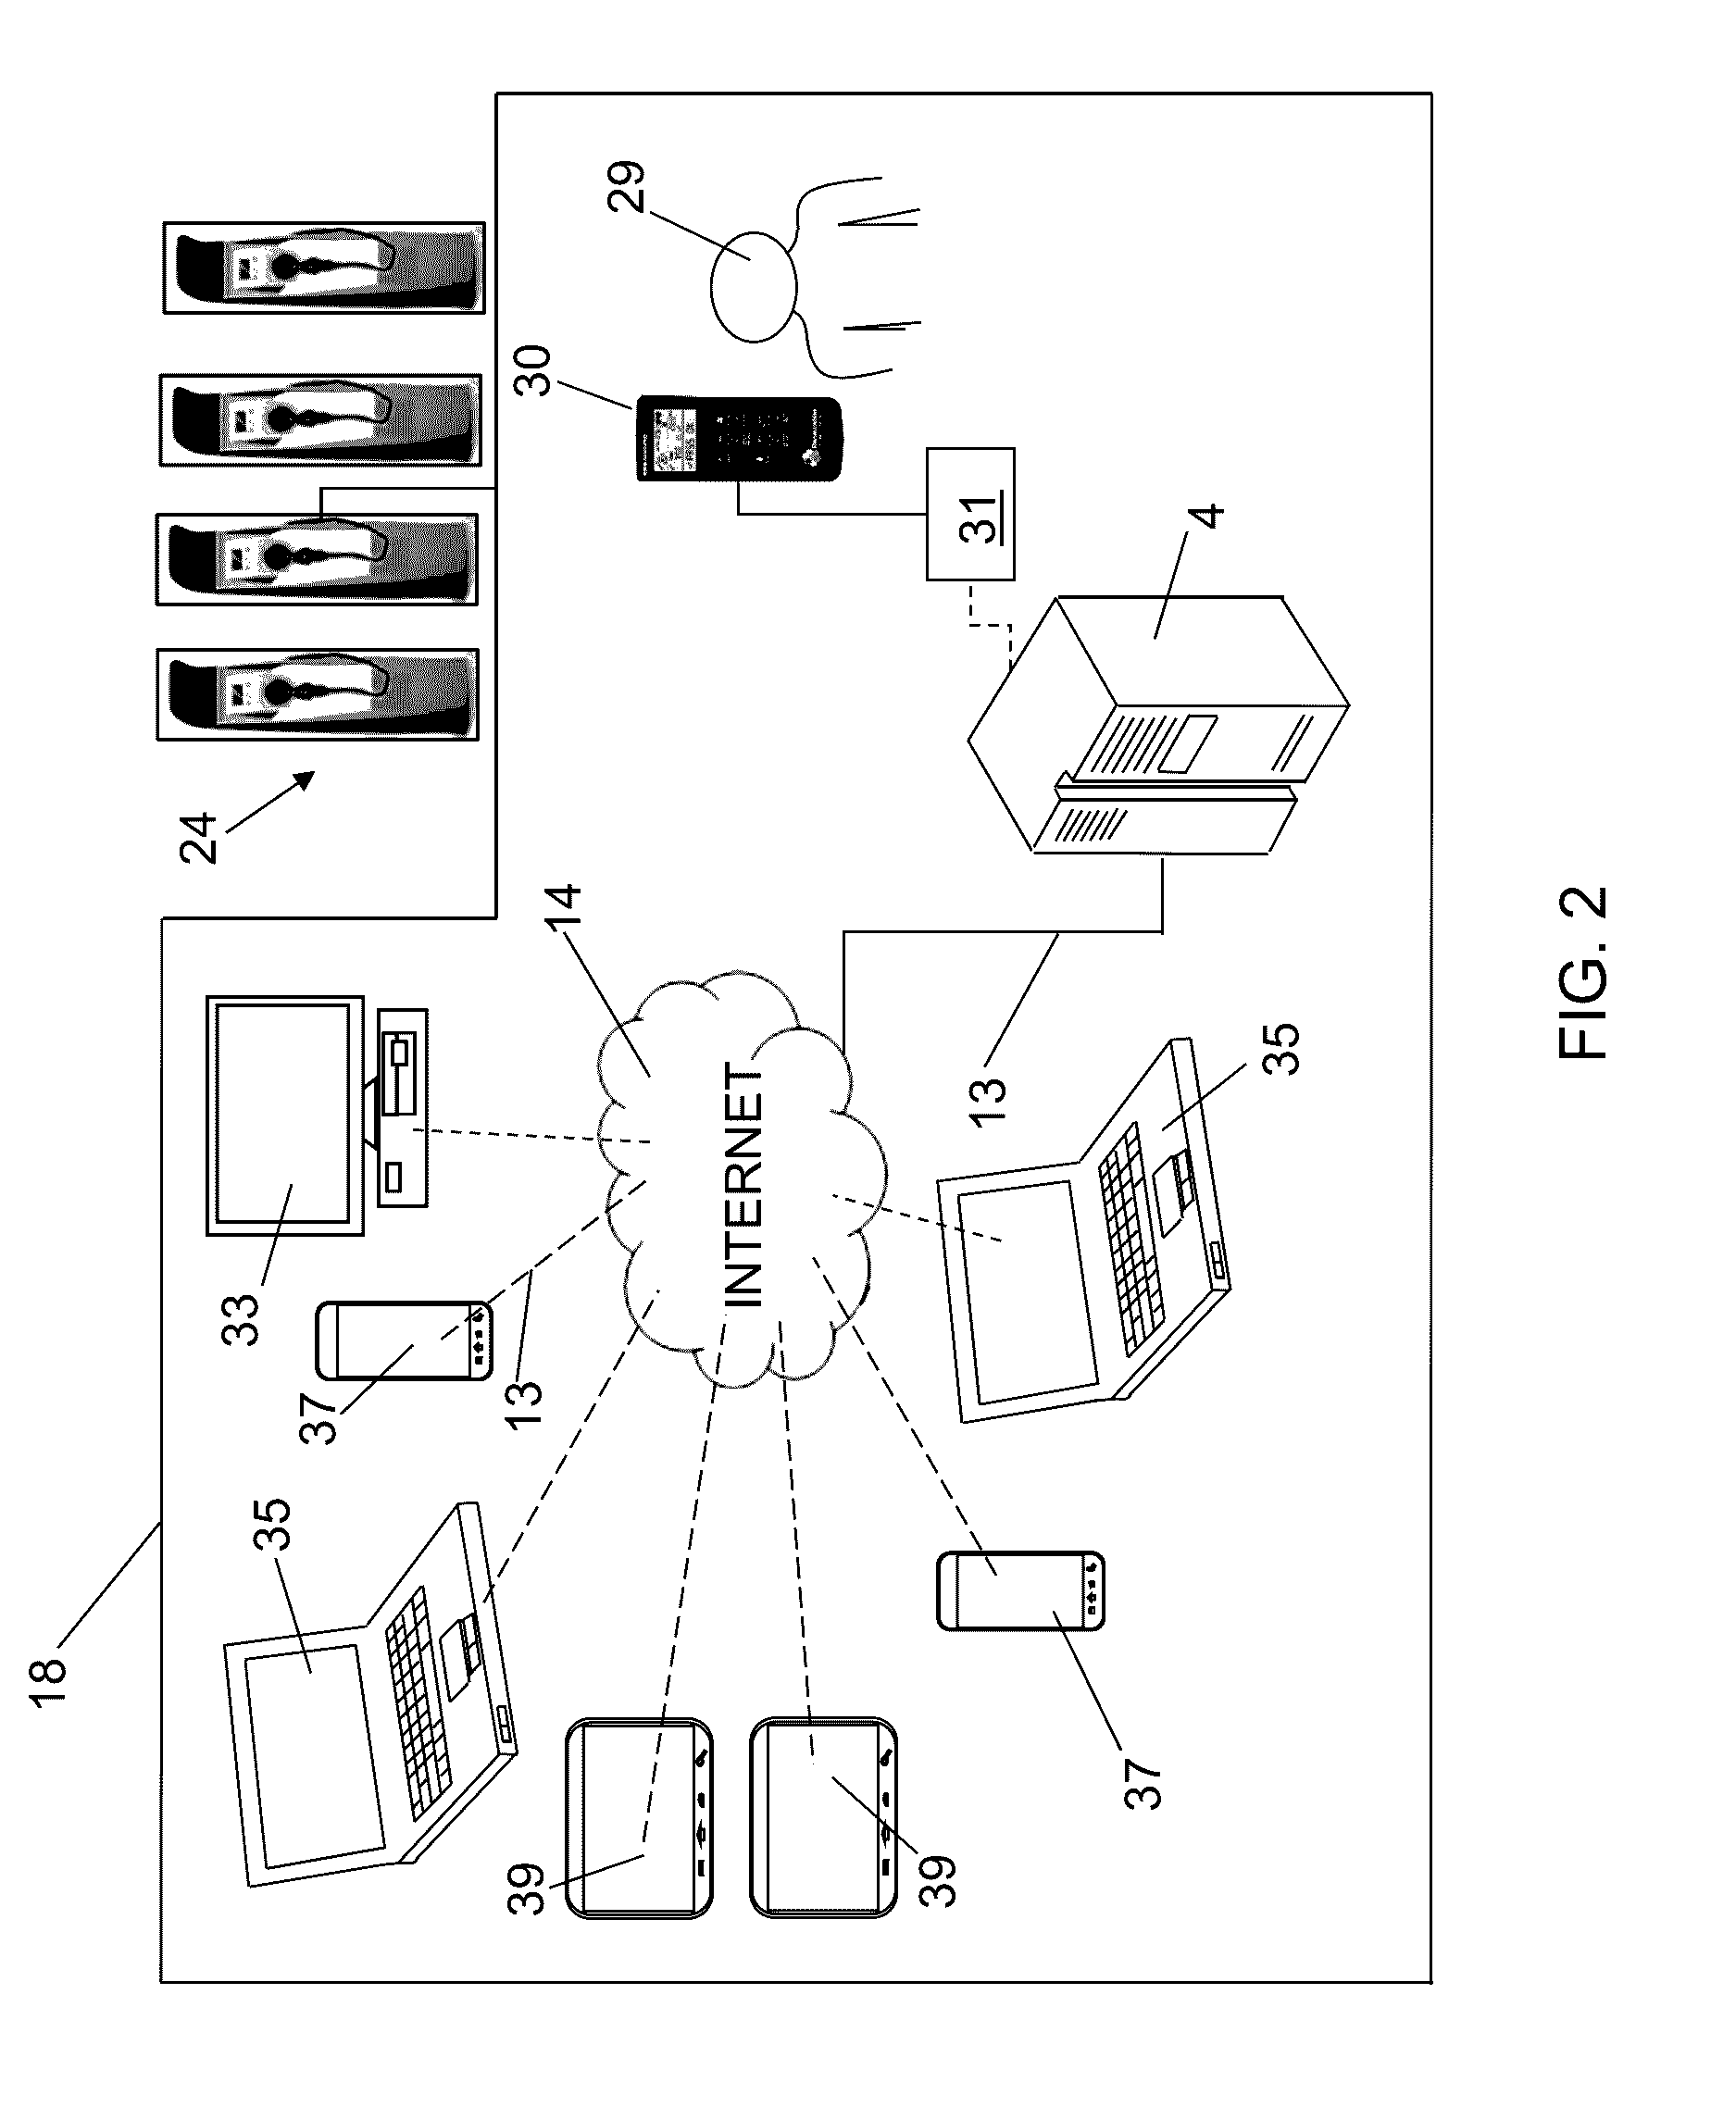 Method and apparatus for a portable electric vehicle supply equipment tester